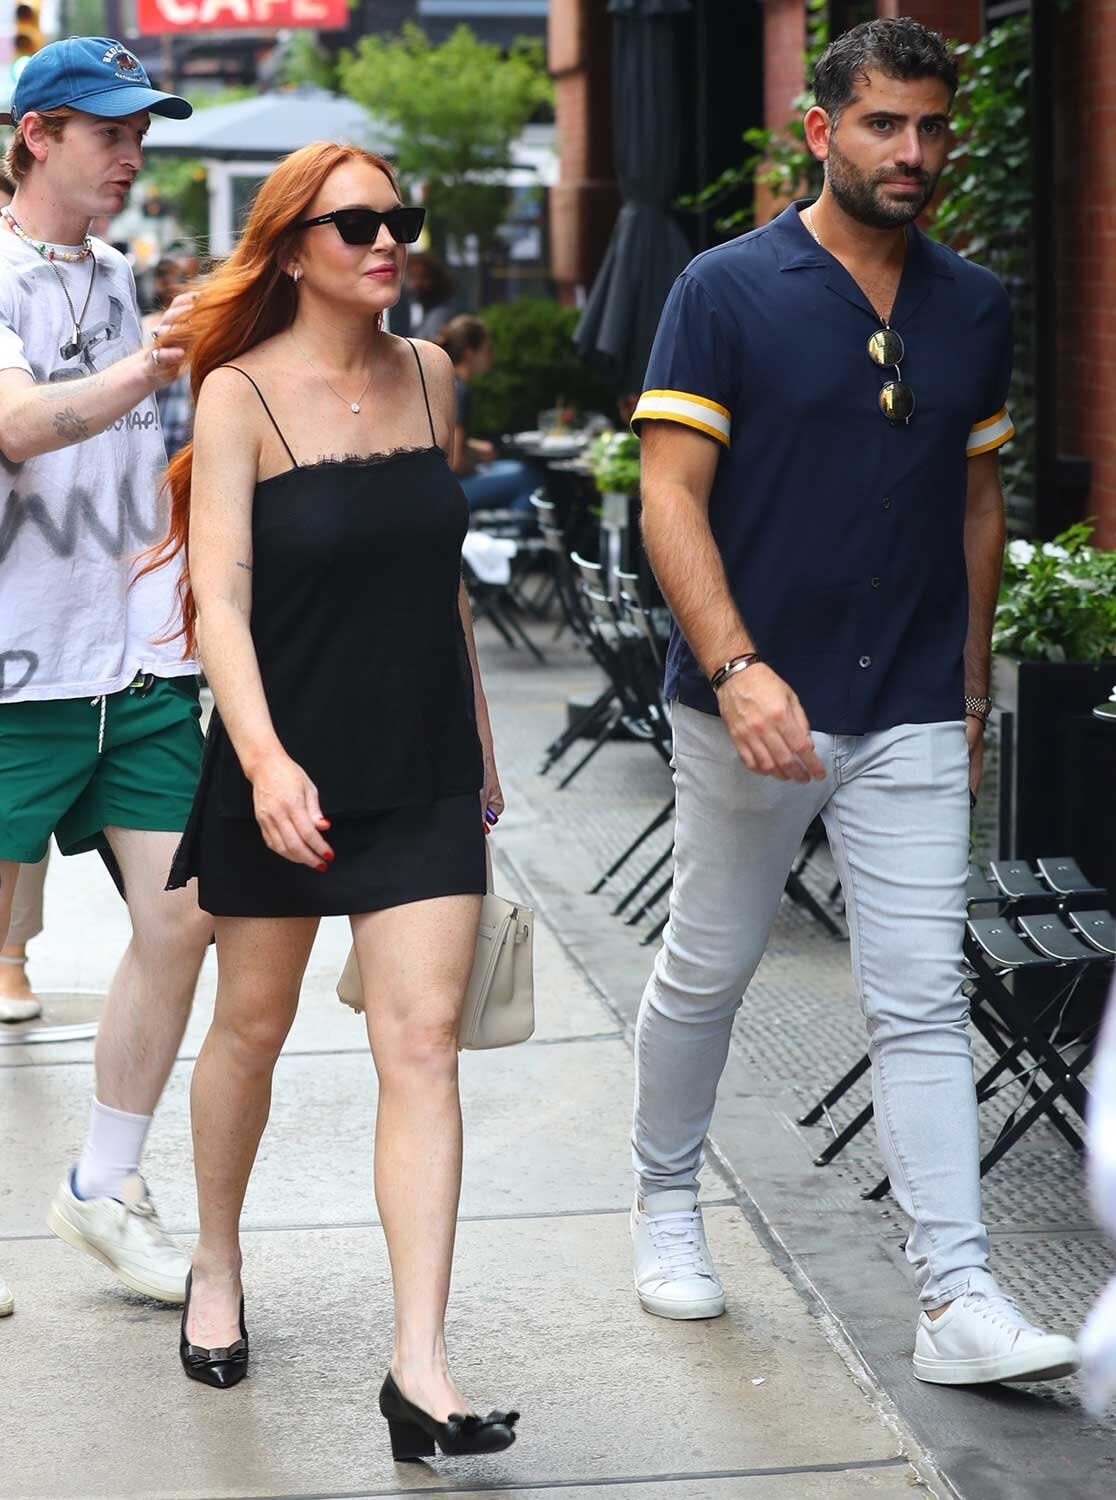 Lindsay Lohan and her husband Bader Shammas spotted heading to their hotel after a day out shopping in New York City.